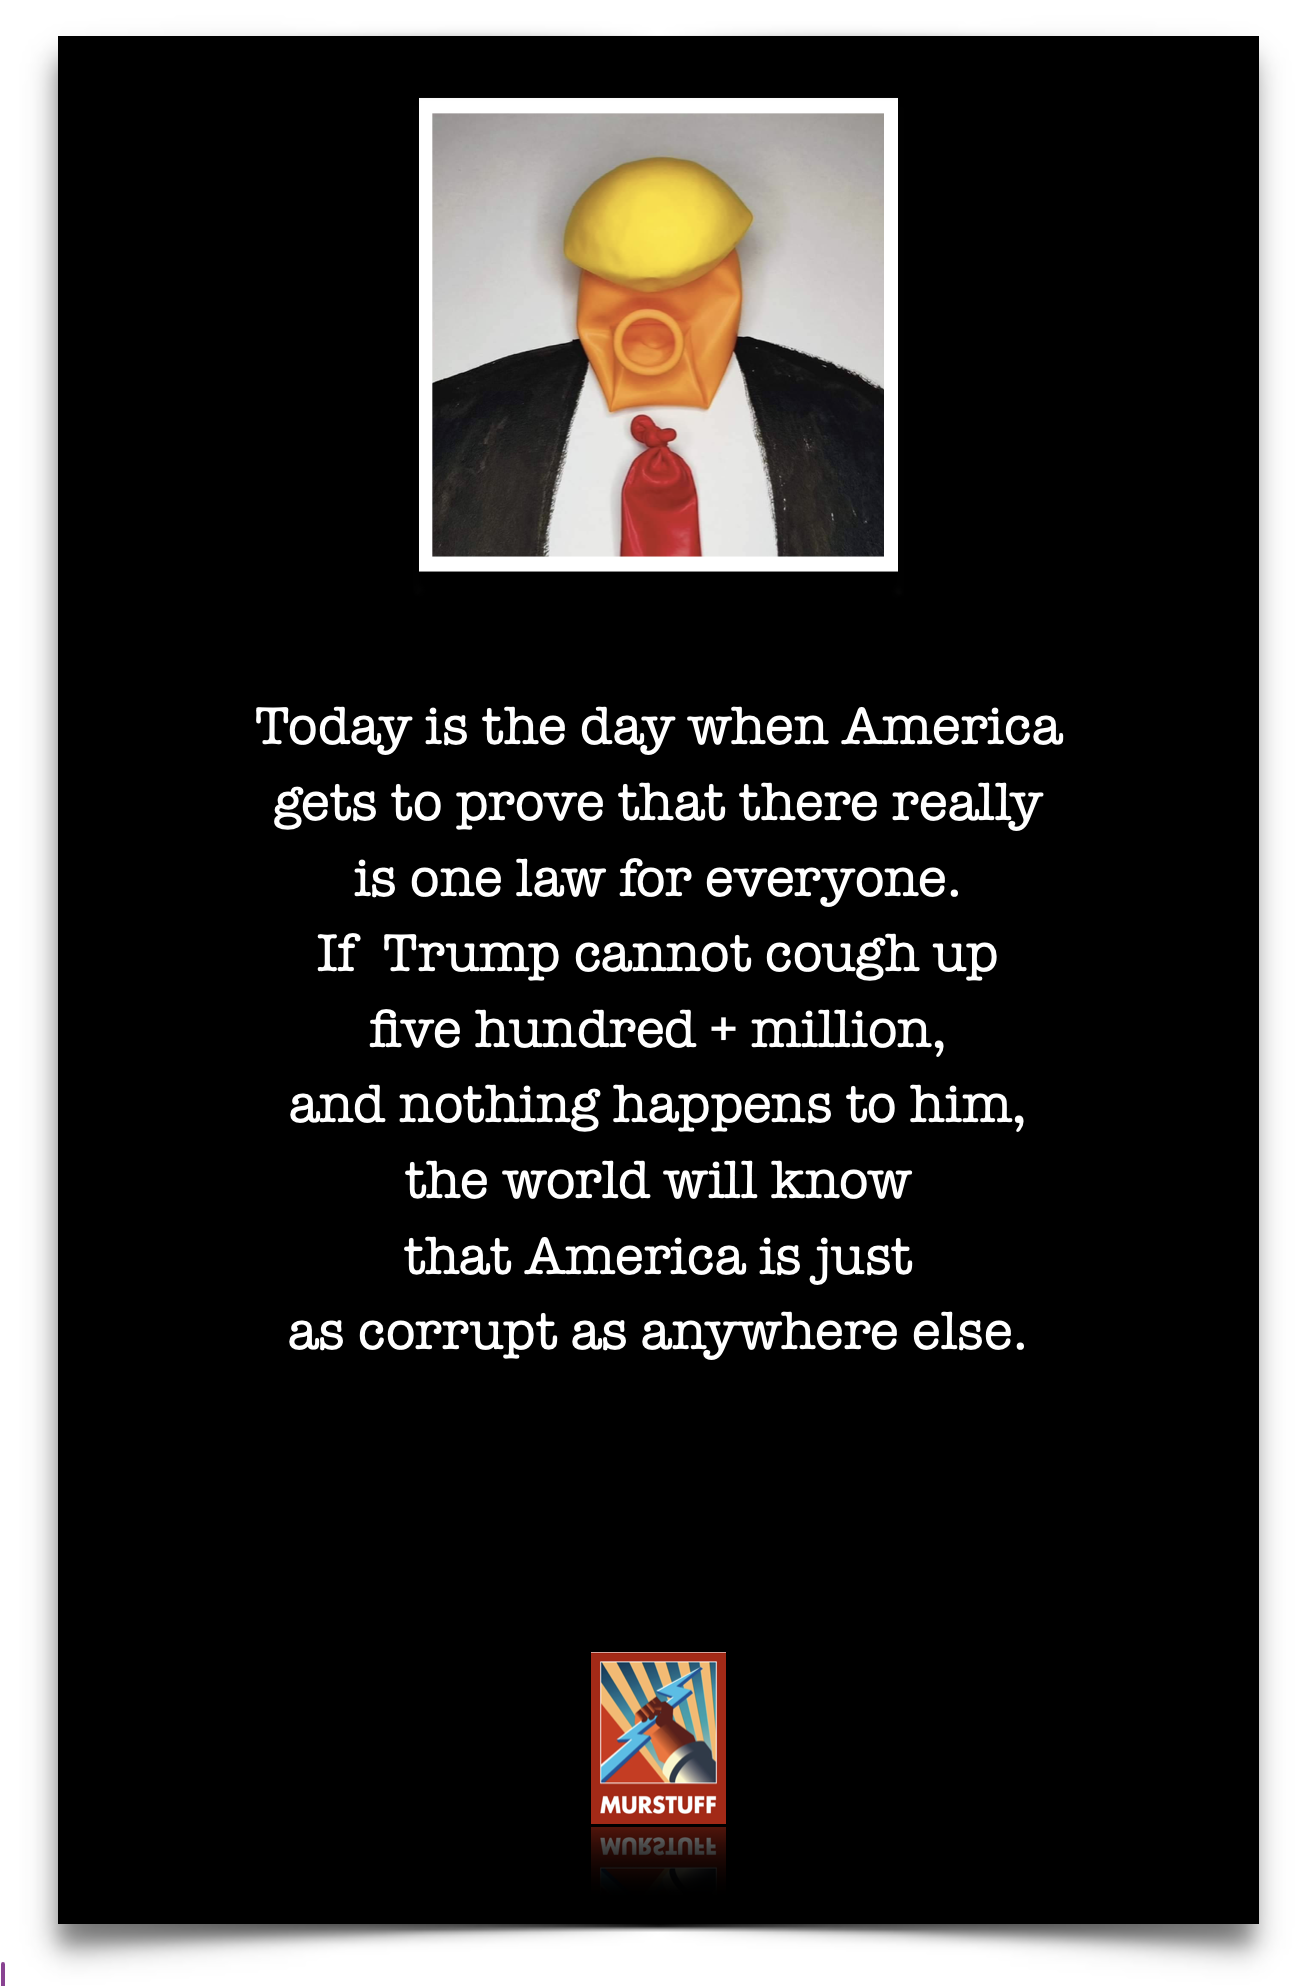 Today is the day when America
gets to prove that there really
is one law for everyone.

If Trump cannot cough up

five hundred + million,
and nothing happens to him,
the world will know
that America is just
as corrupt as anywhere else.

MURSTUFF